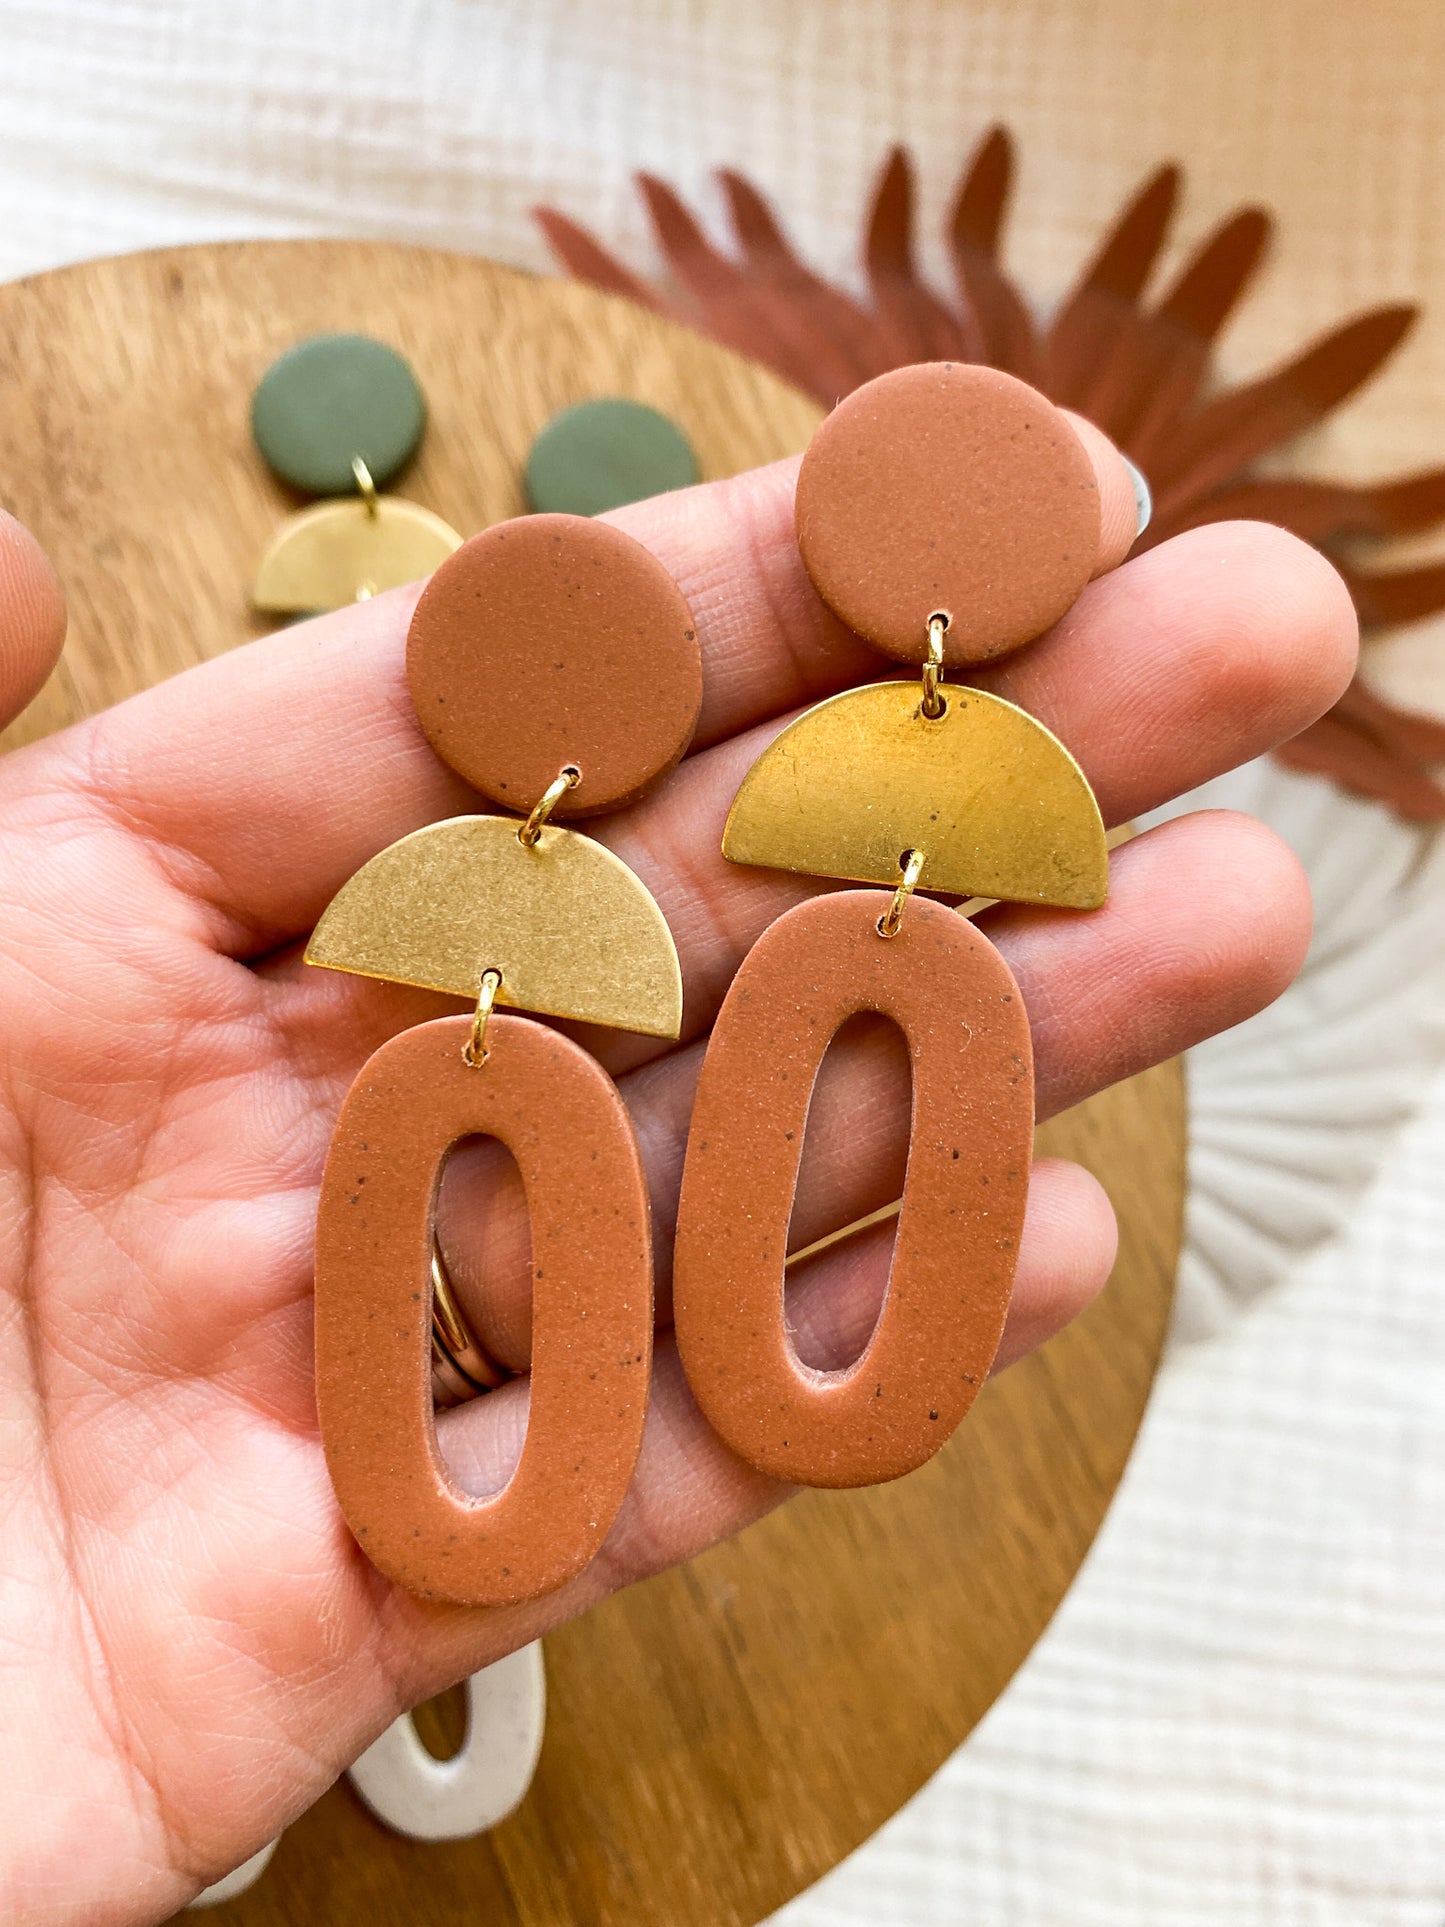 Autumn Brass and Clay Boho Statement Earrings | Fall Earrings | Olive Green, Speckled White, Terra Cotta | Lightweight